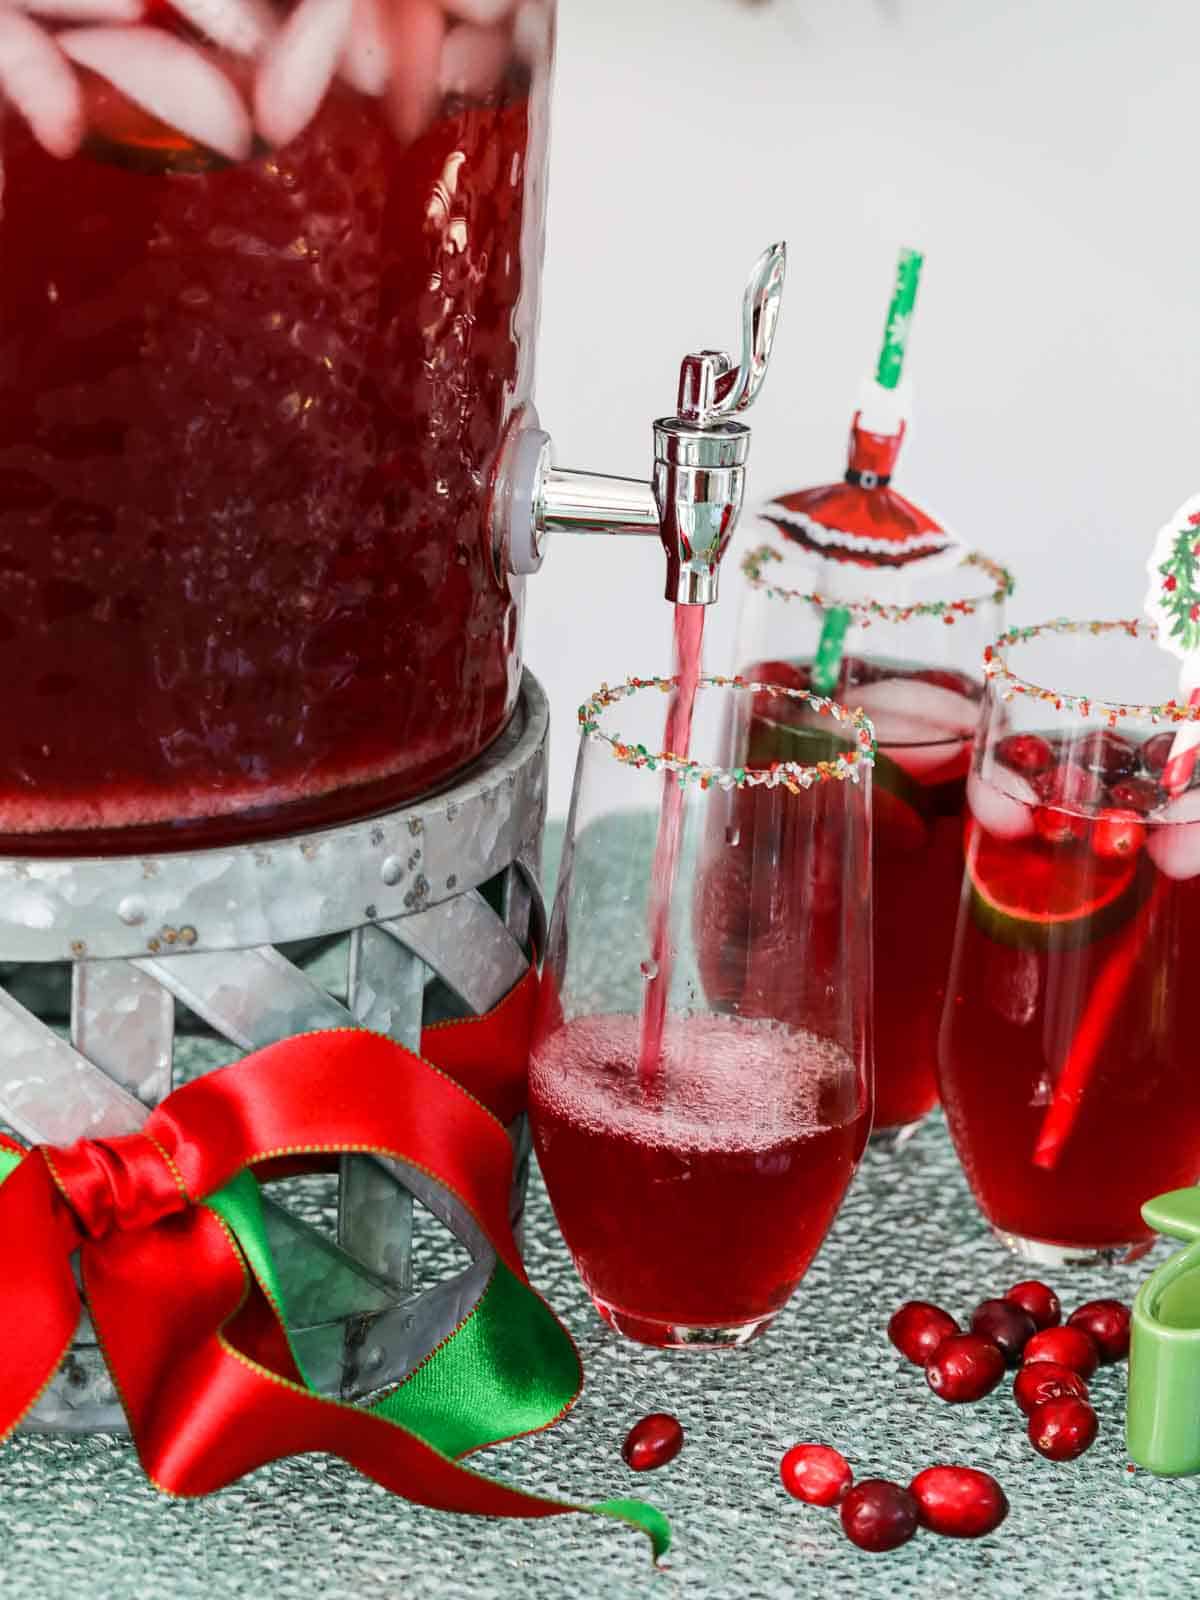 https://www.delicioustable.com/wp-content/uploads/2022/11/Pouring-Christmas-punch-bubbles.jpg